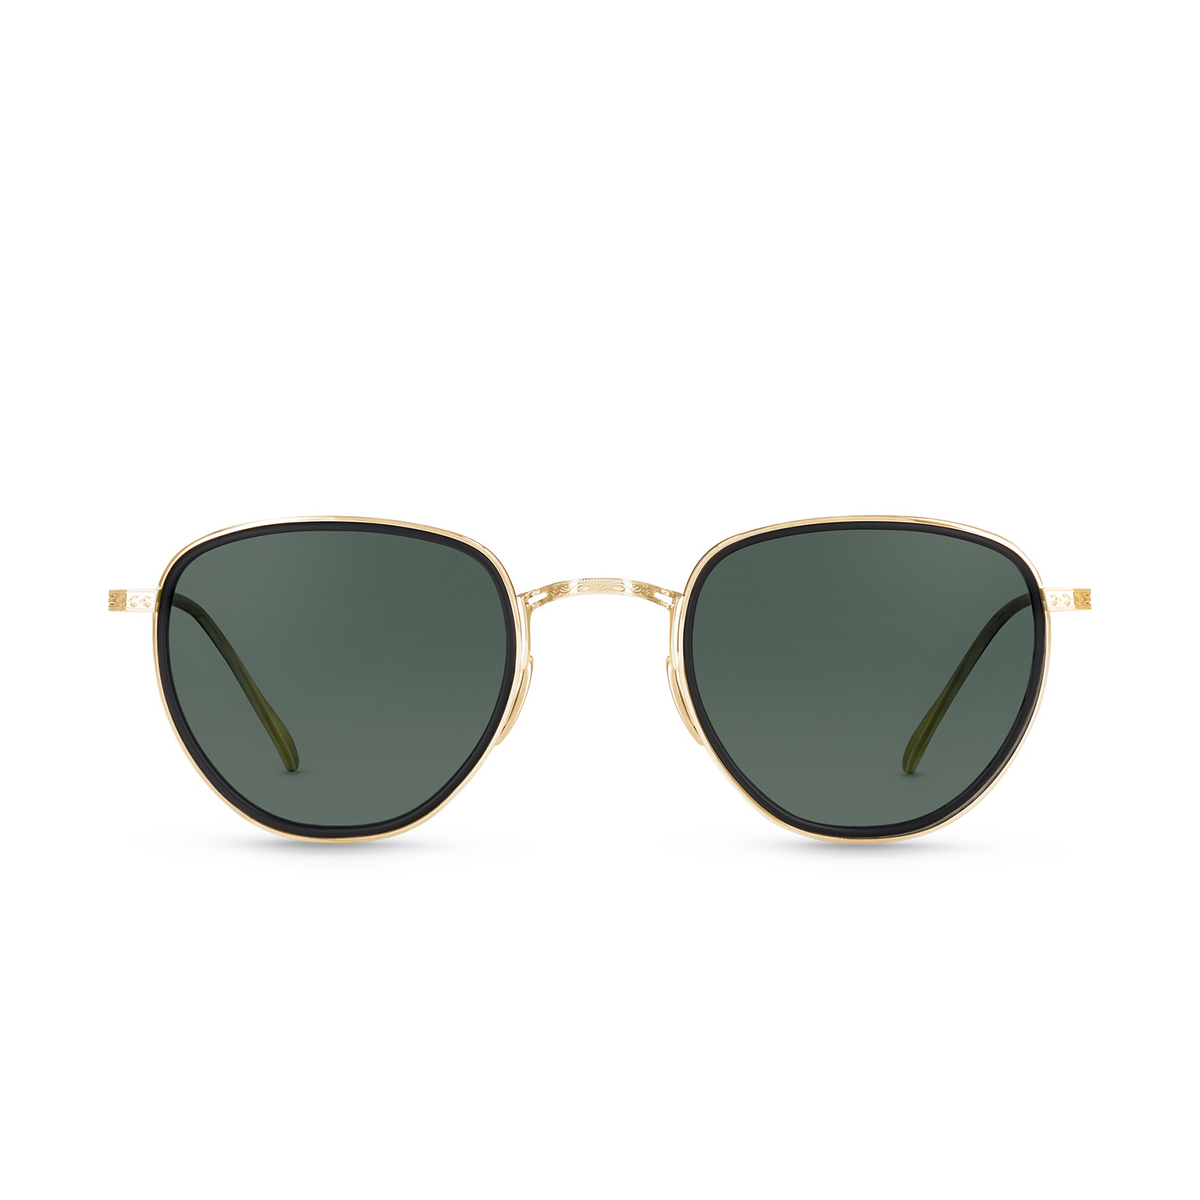 Mr. Leight ROKU S Sunglasses MBK-12KWGHRN - front view